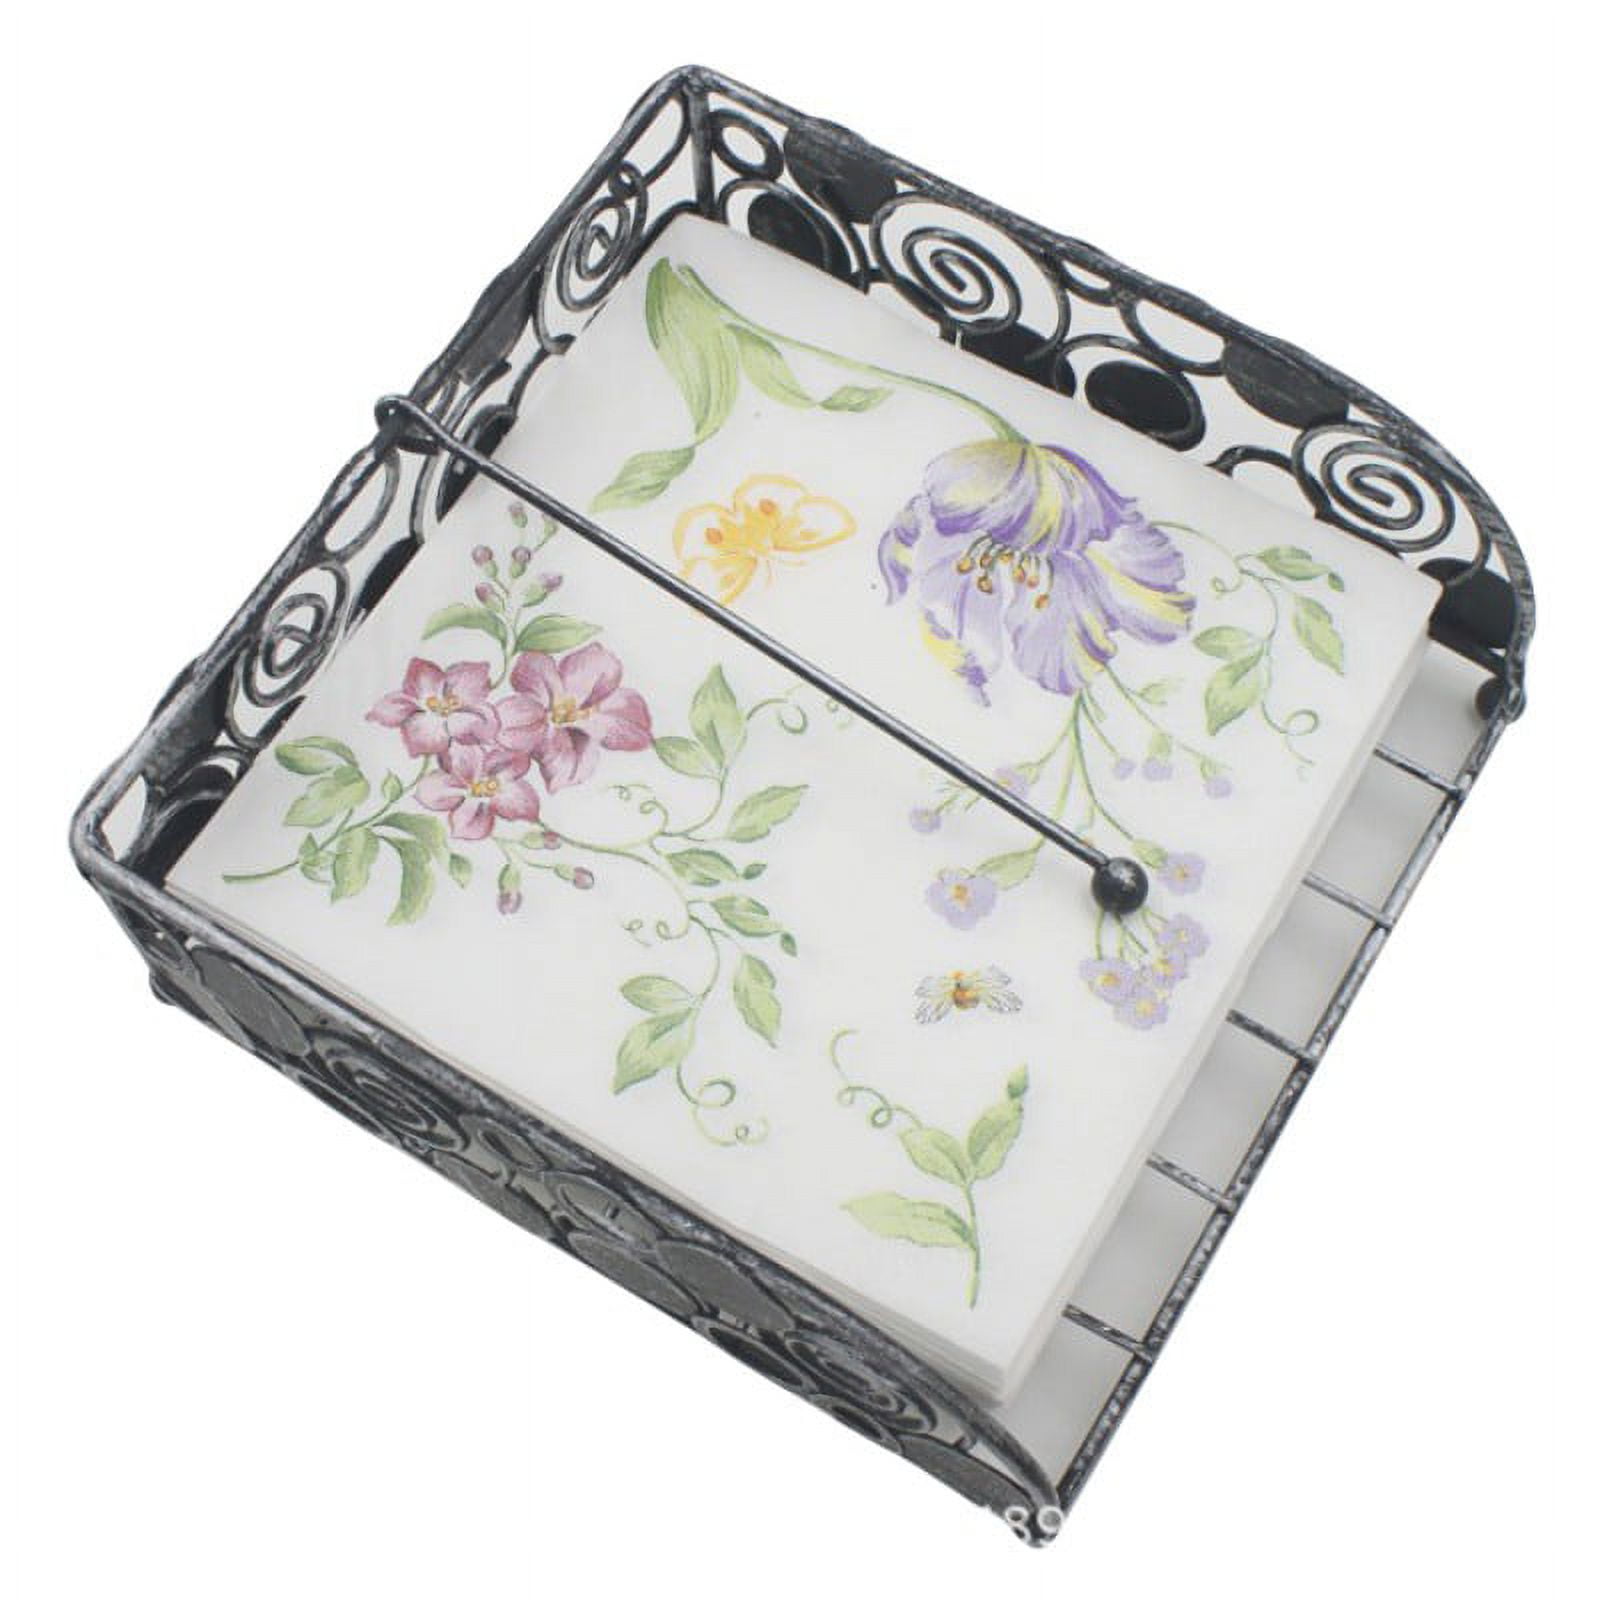 AVEVER 20-ct 13x13 Assorted Floral Napkins Decoupage Pretty Paper Napkins  Mother's Day Summer Napkins Fall Napkins Paper Fall Cocktail Napkins,  white